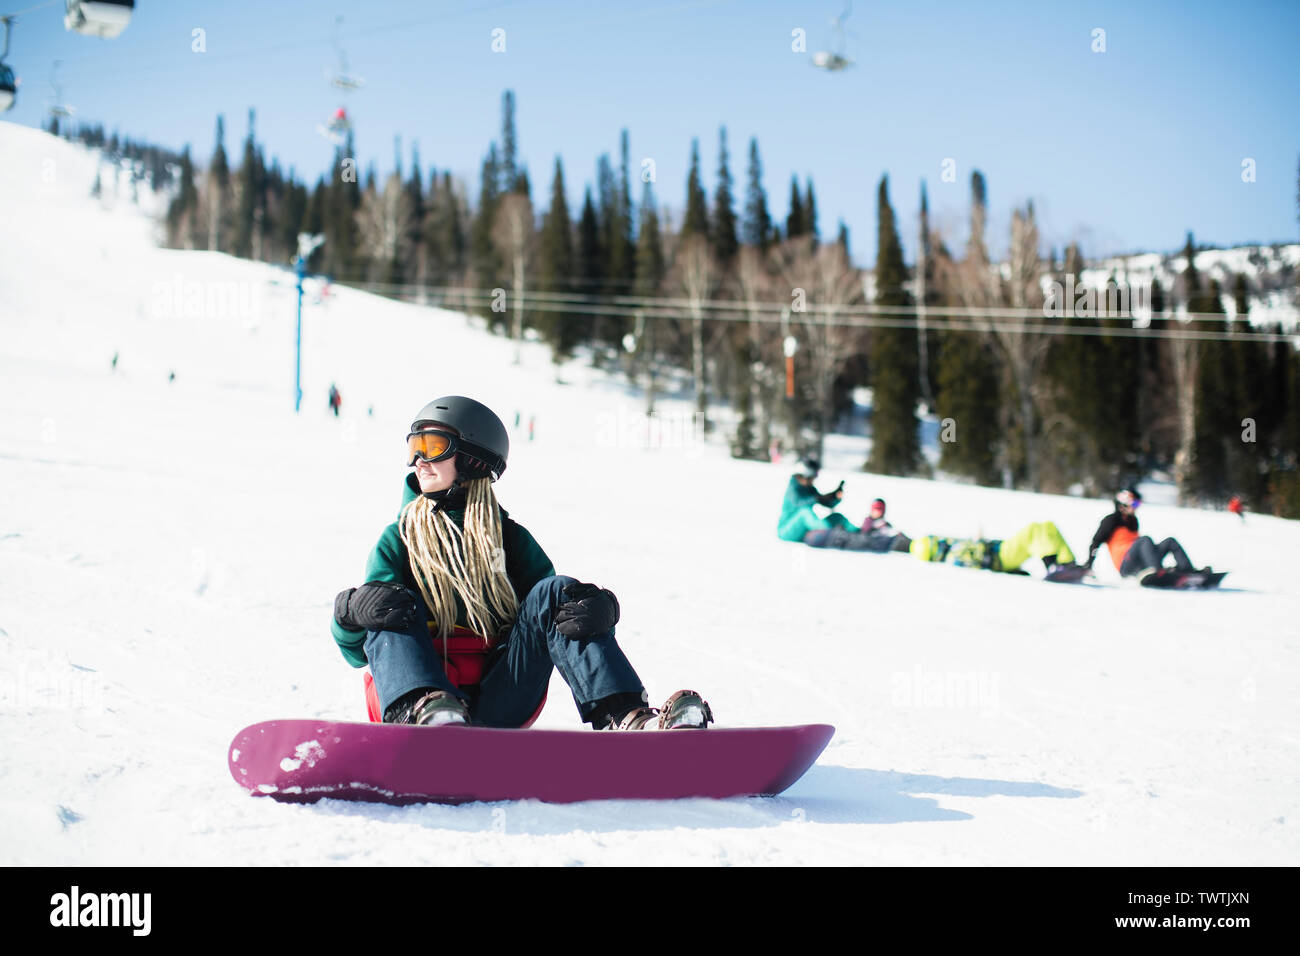 Woman snowboarder sitting on a snowy slope. Stock Photo